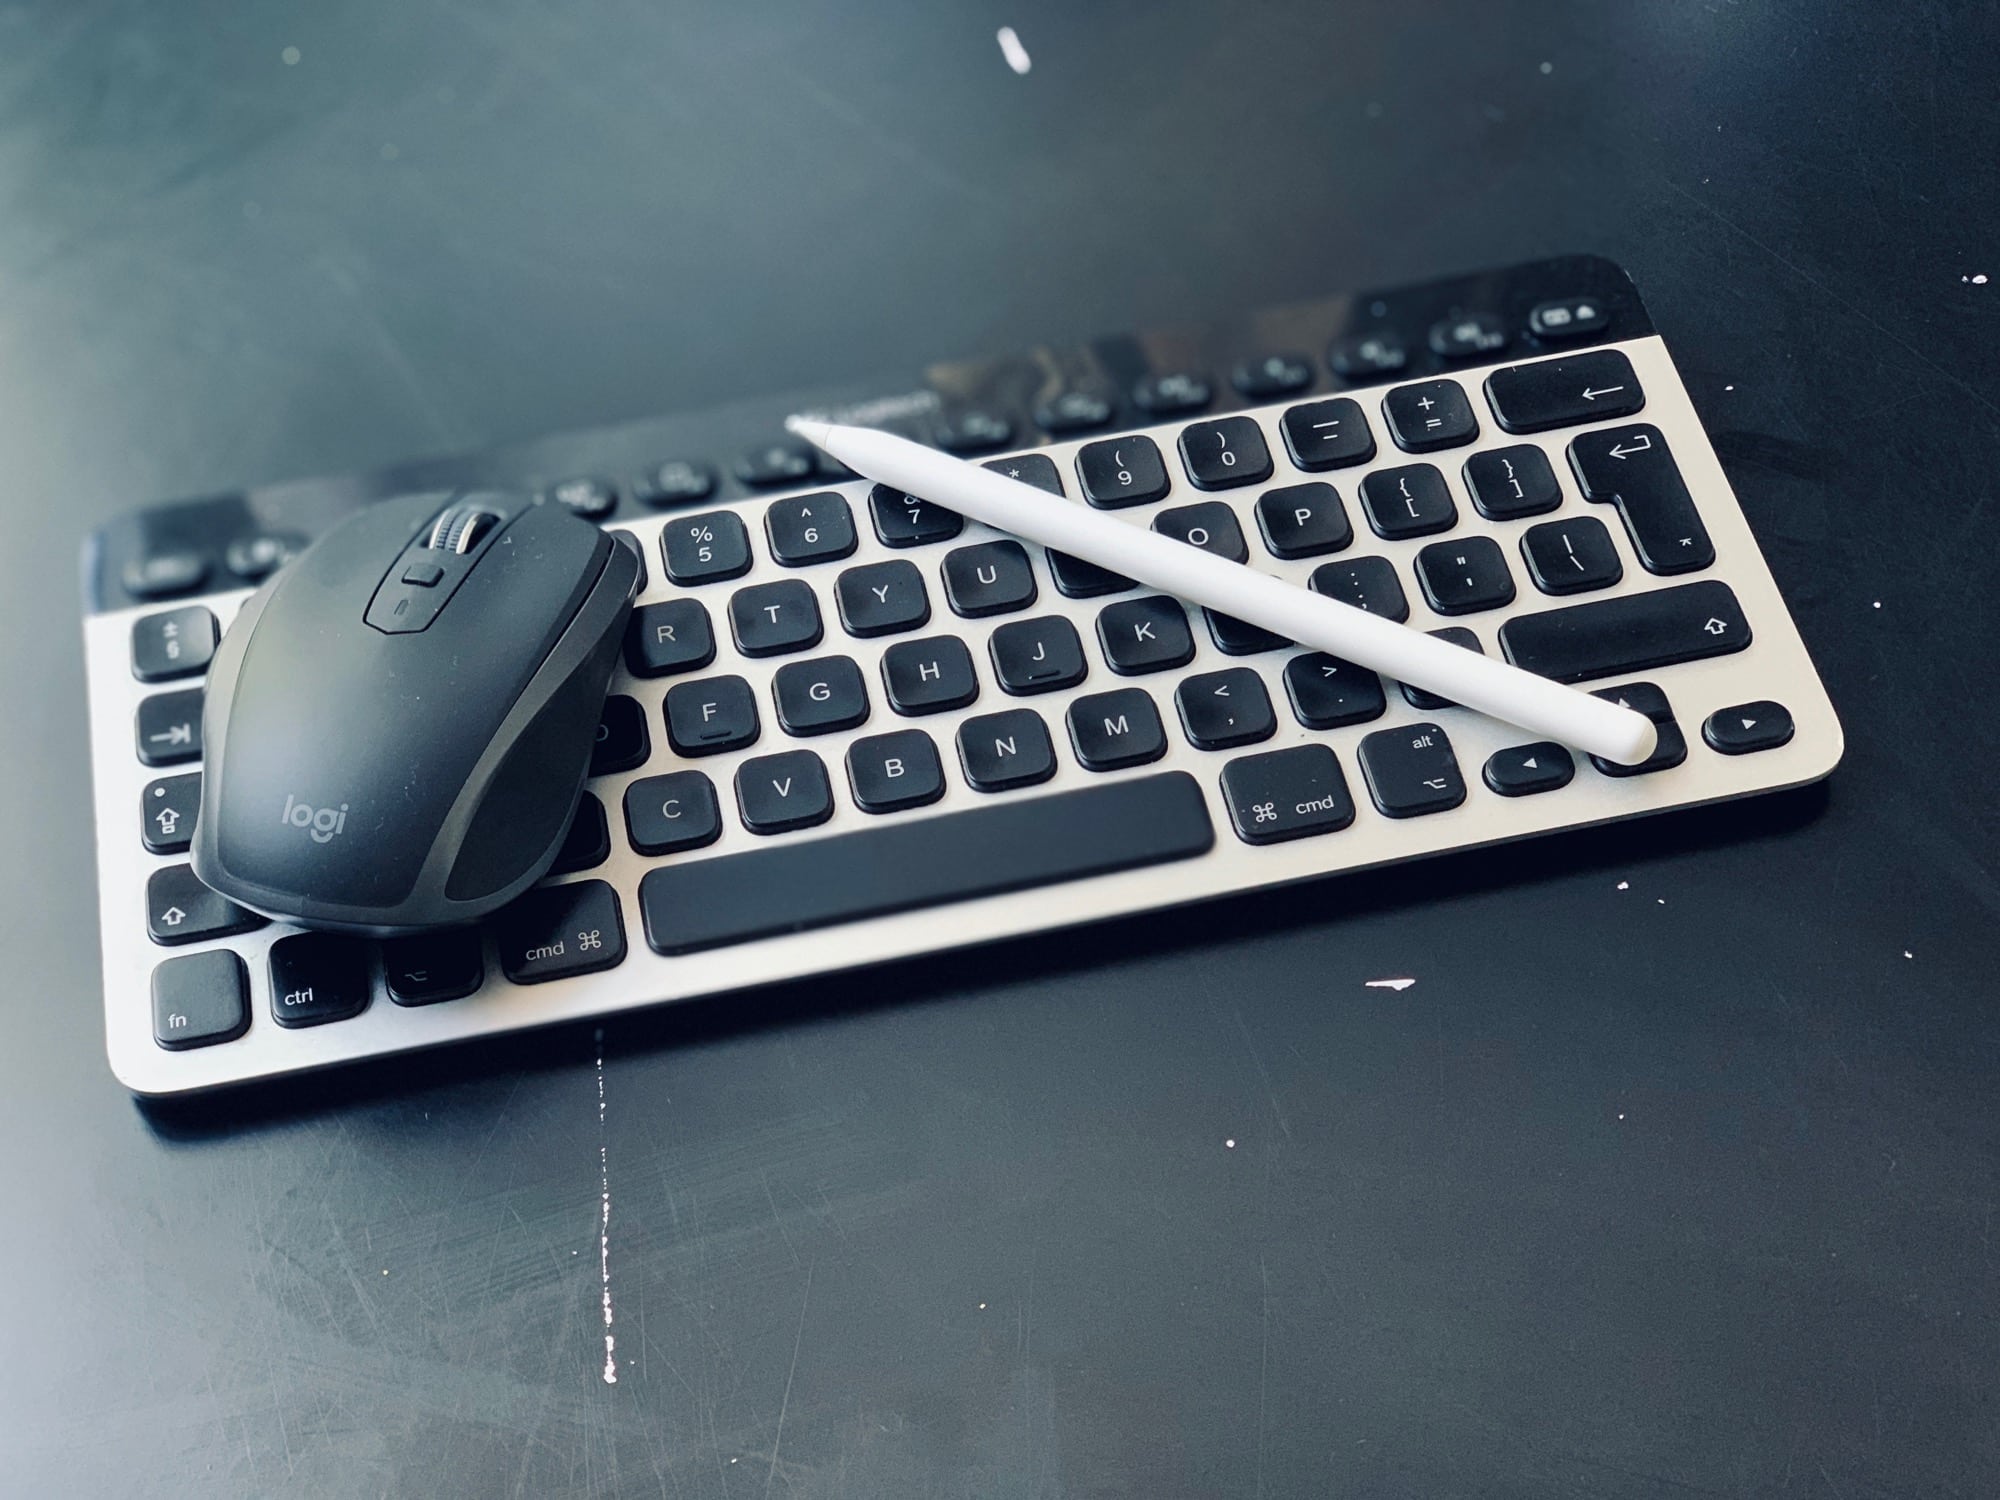 Mouse support, but you still can't swap the ⌘ and ⌥ keys on a PC keyboard.